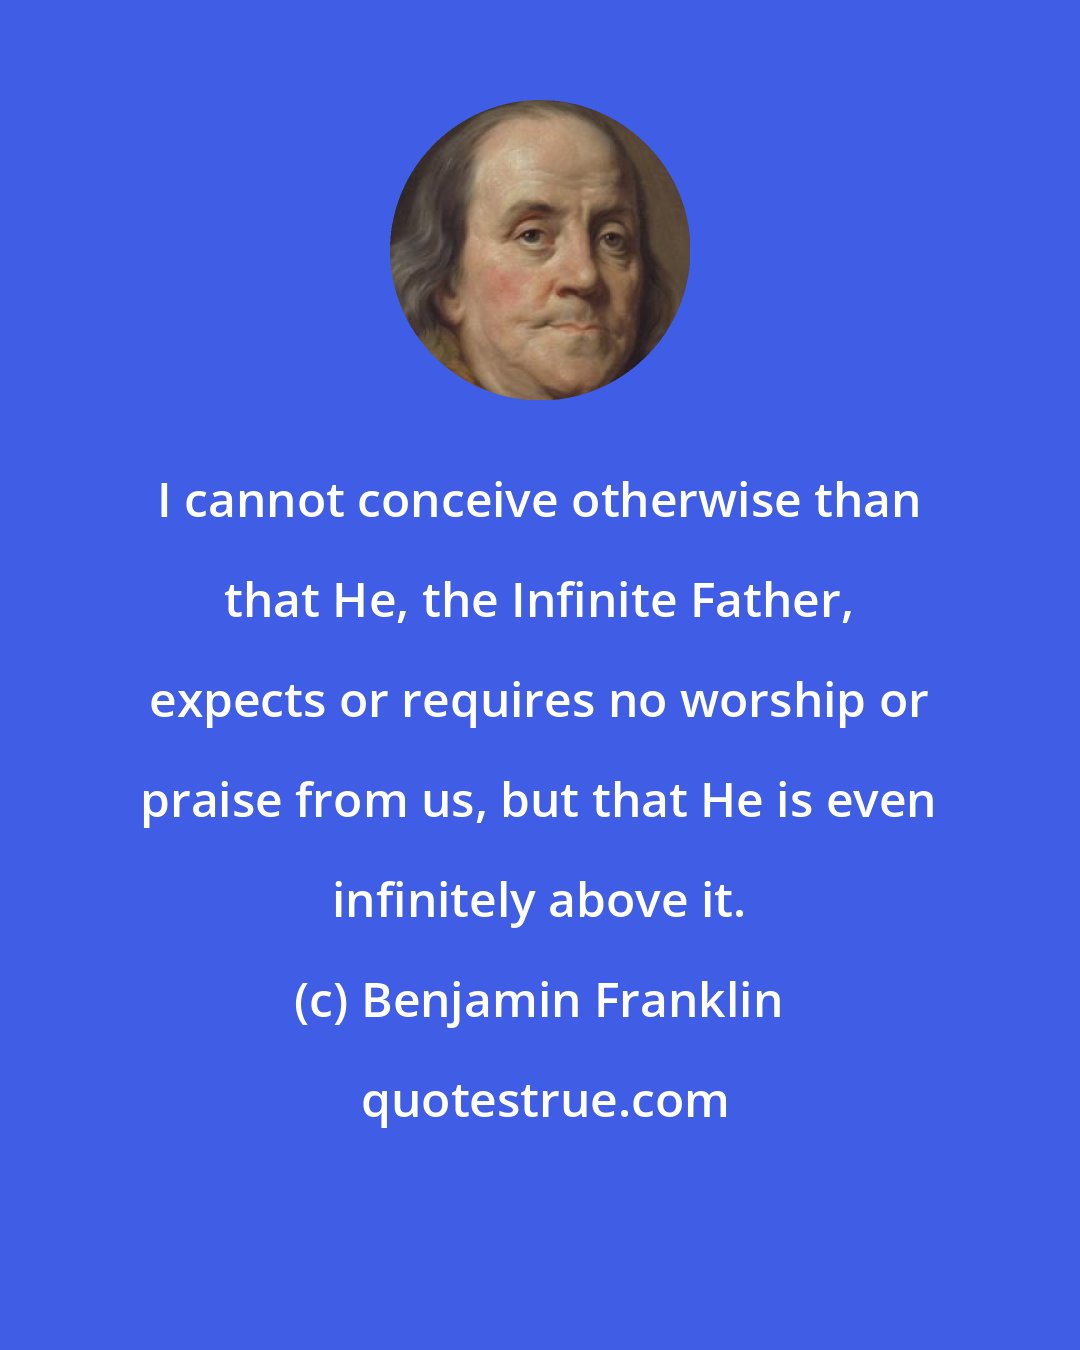 Benjamin Franklin: I cannot conceive otherwise than that He, the Infinite Father, expects or requires no worship or praise from us, but that He is even infinitely above it.